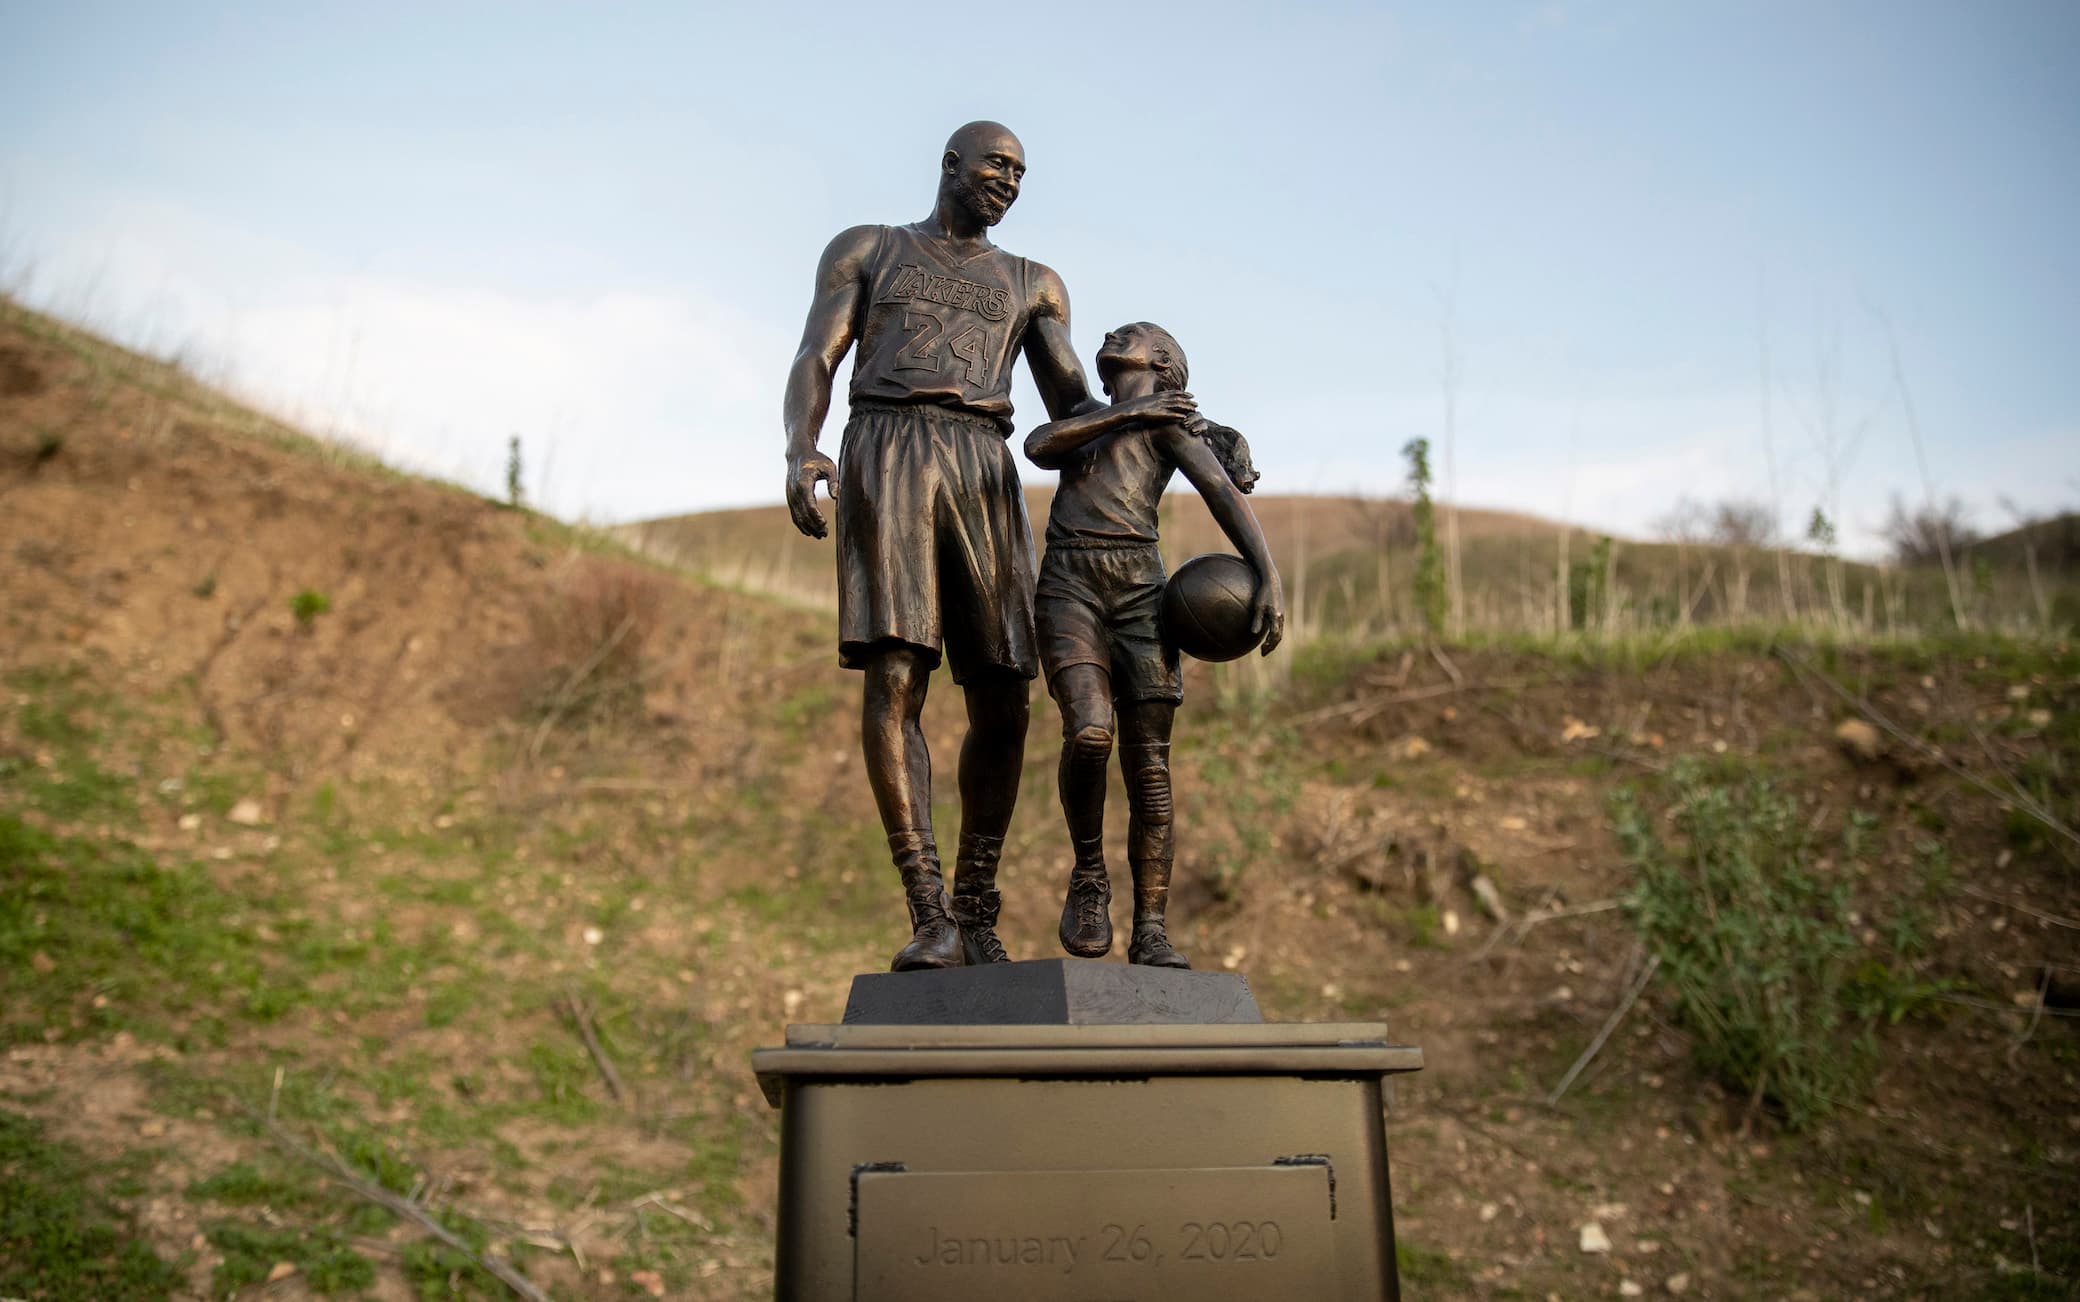 A statue of Kobe Bryant and his daughter Gianna was erected at the place where the helicopter crashed, below is the day the tragic accident happened - January 26, 2020.